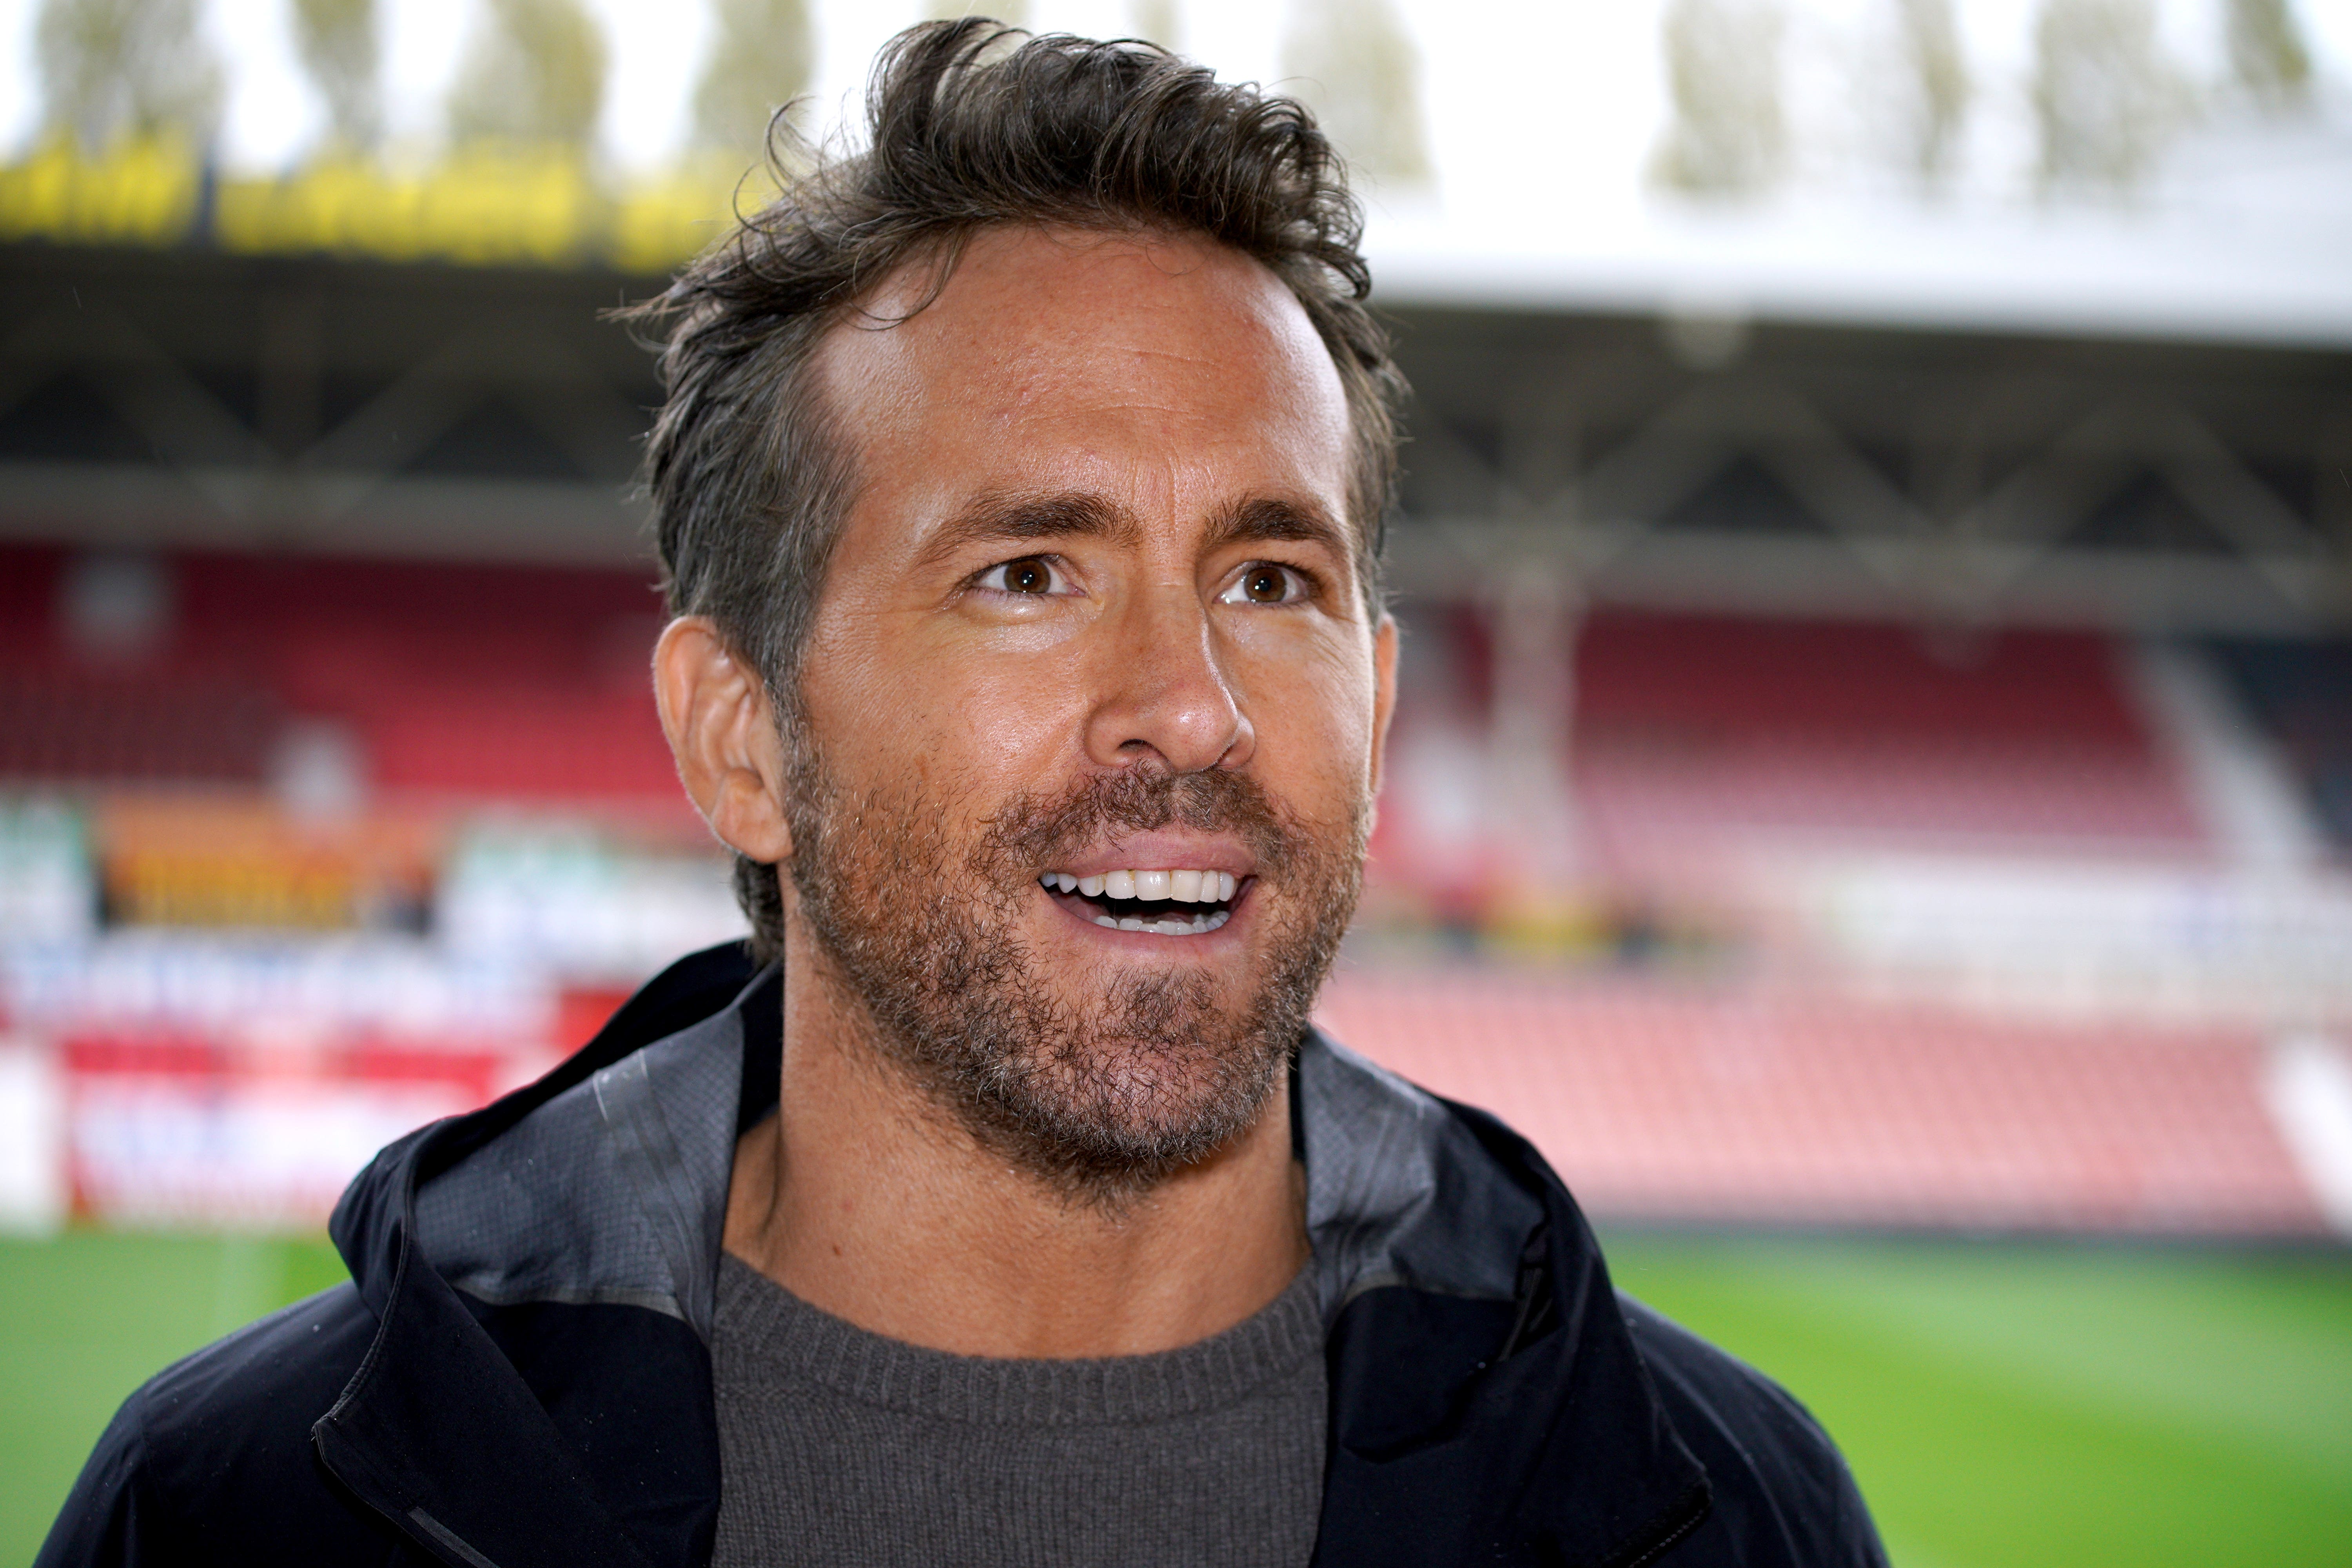 Ryan Reynolds and Rob McElhenney to play for Wrexham in American 7v7